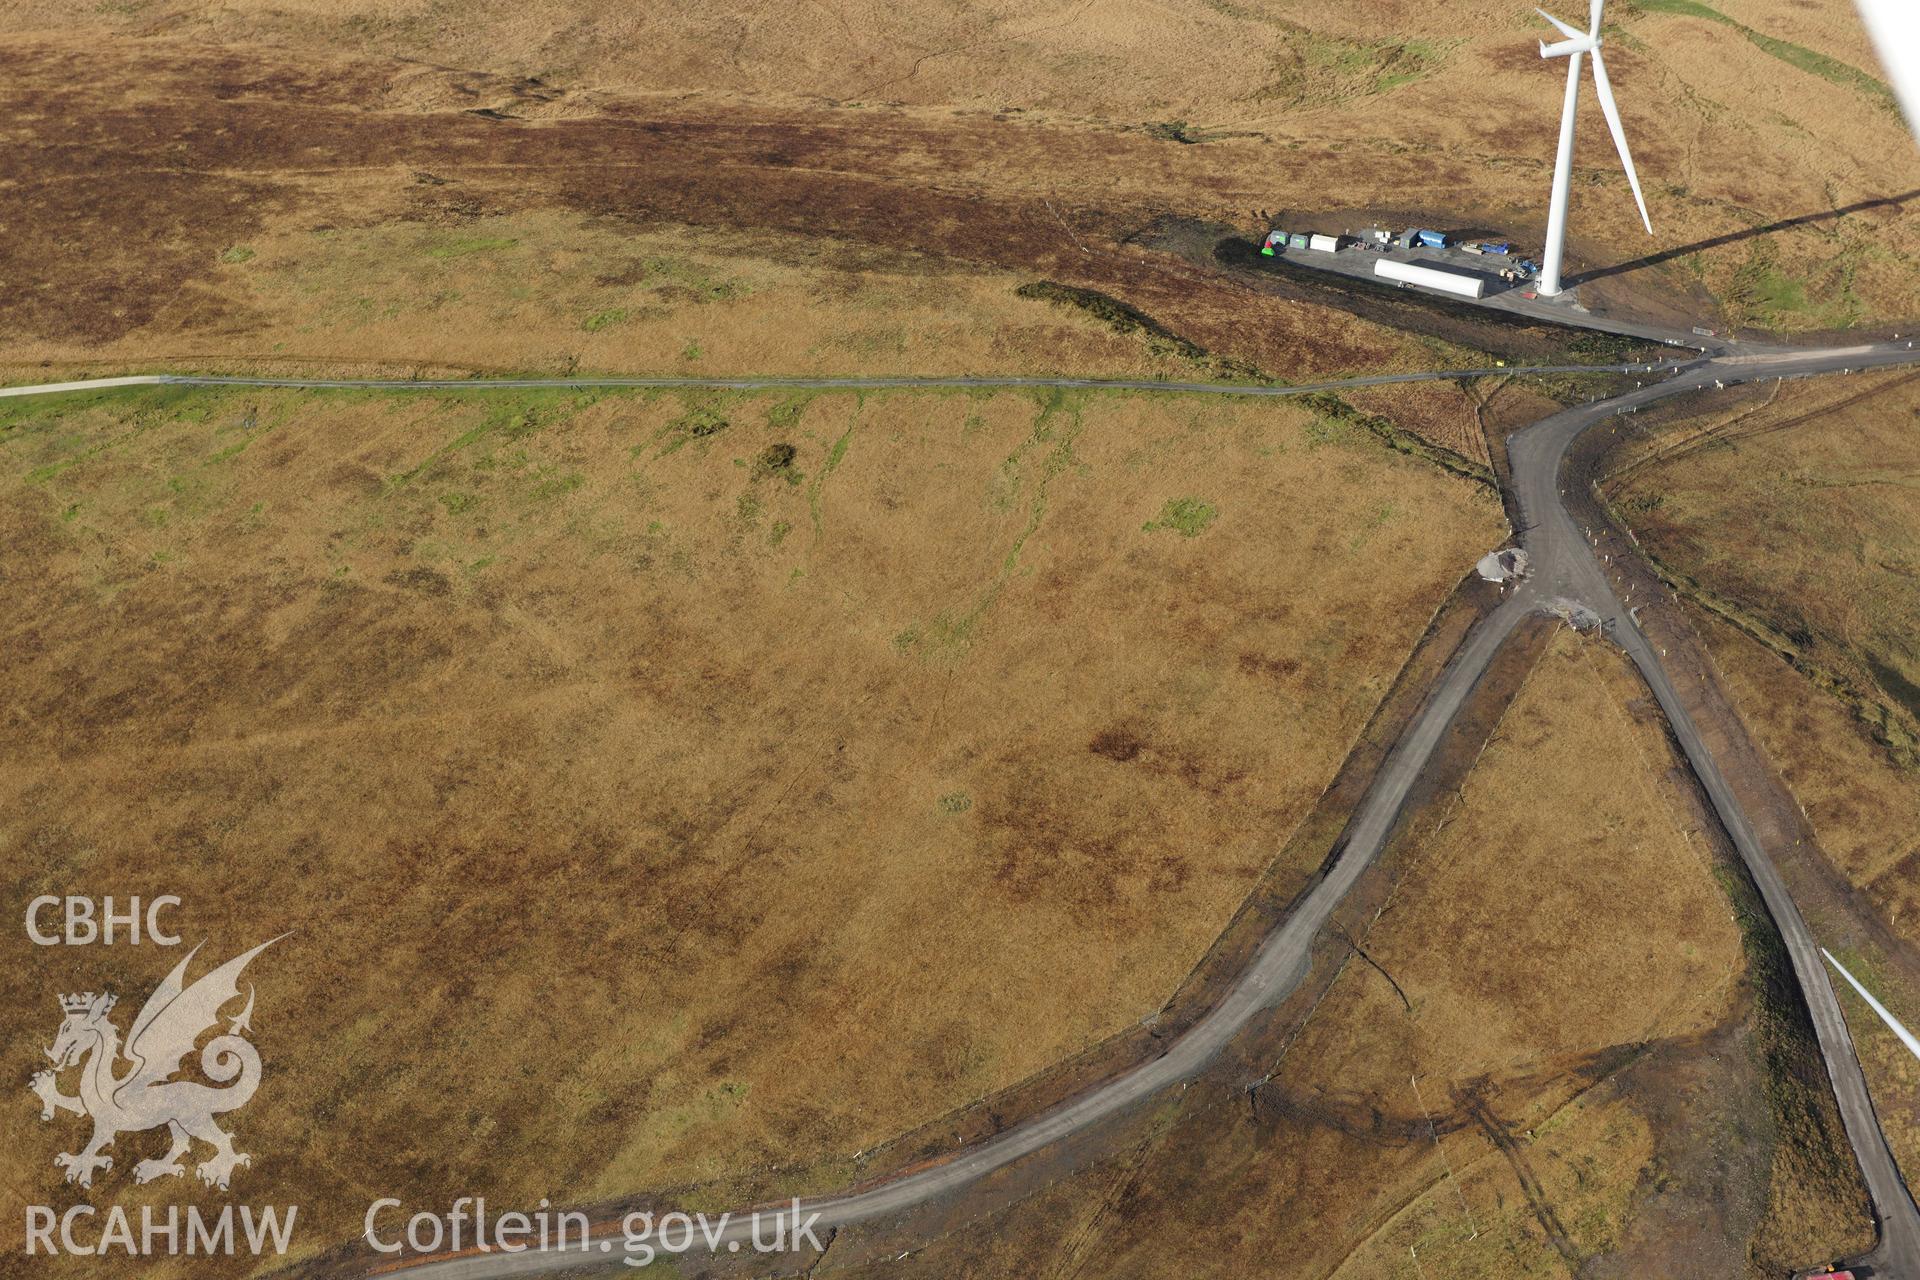 RCAHMW colour oblique photograph of Mynydd y Betws windfarm, view from south-east. Taken by Toby Driver on 28/11/2012.